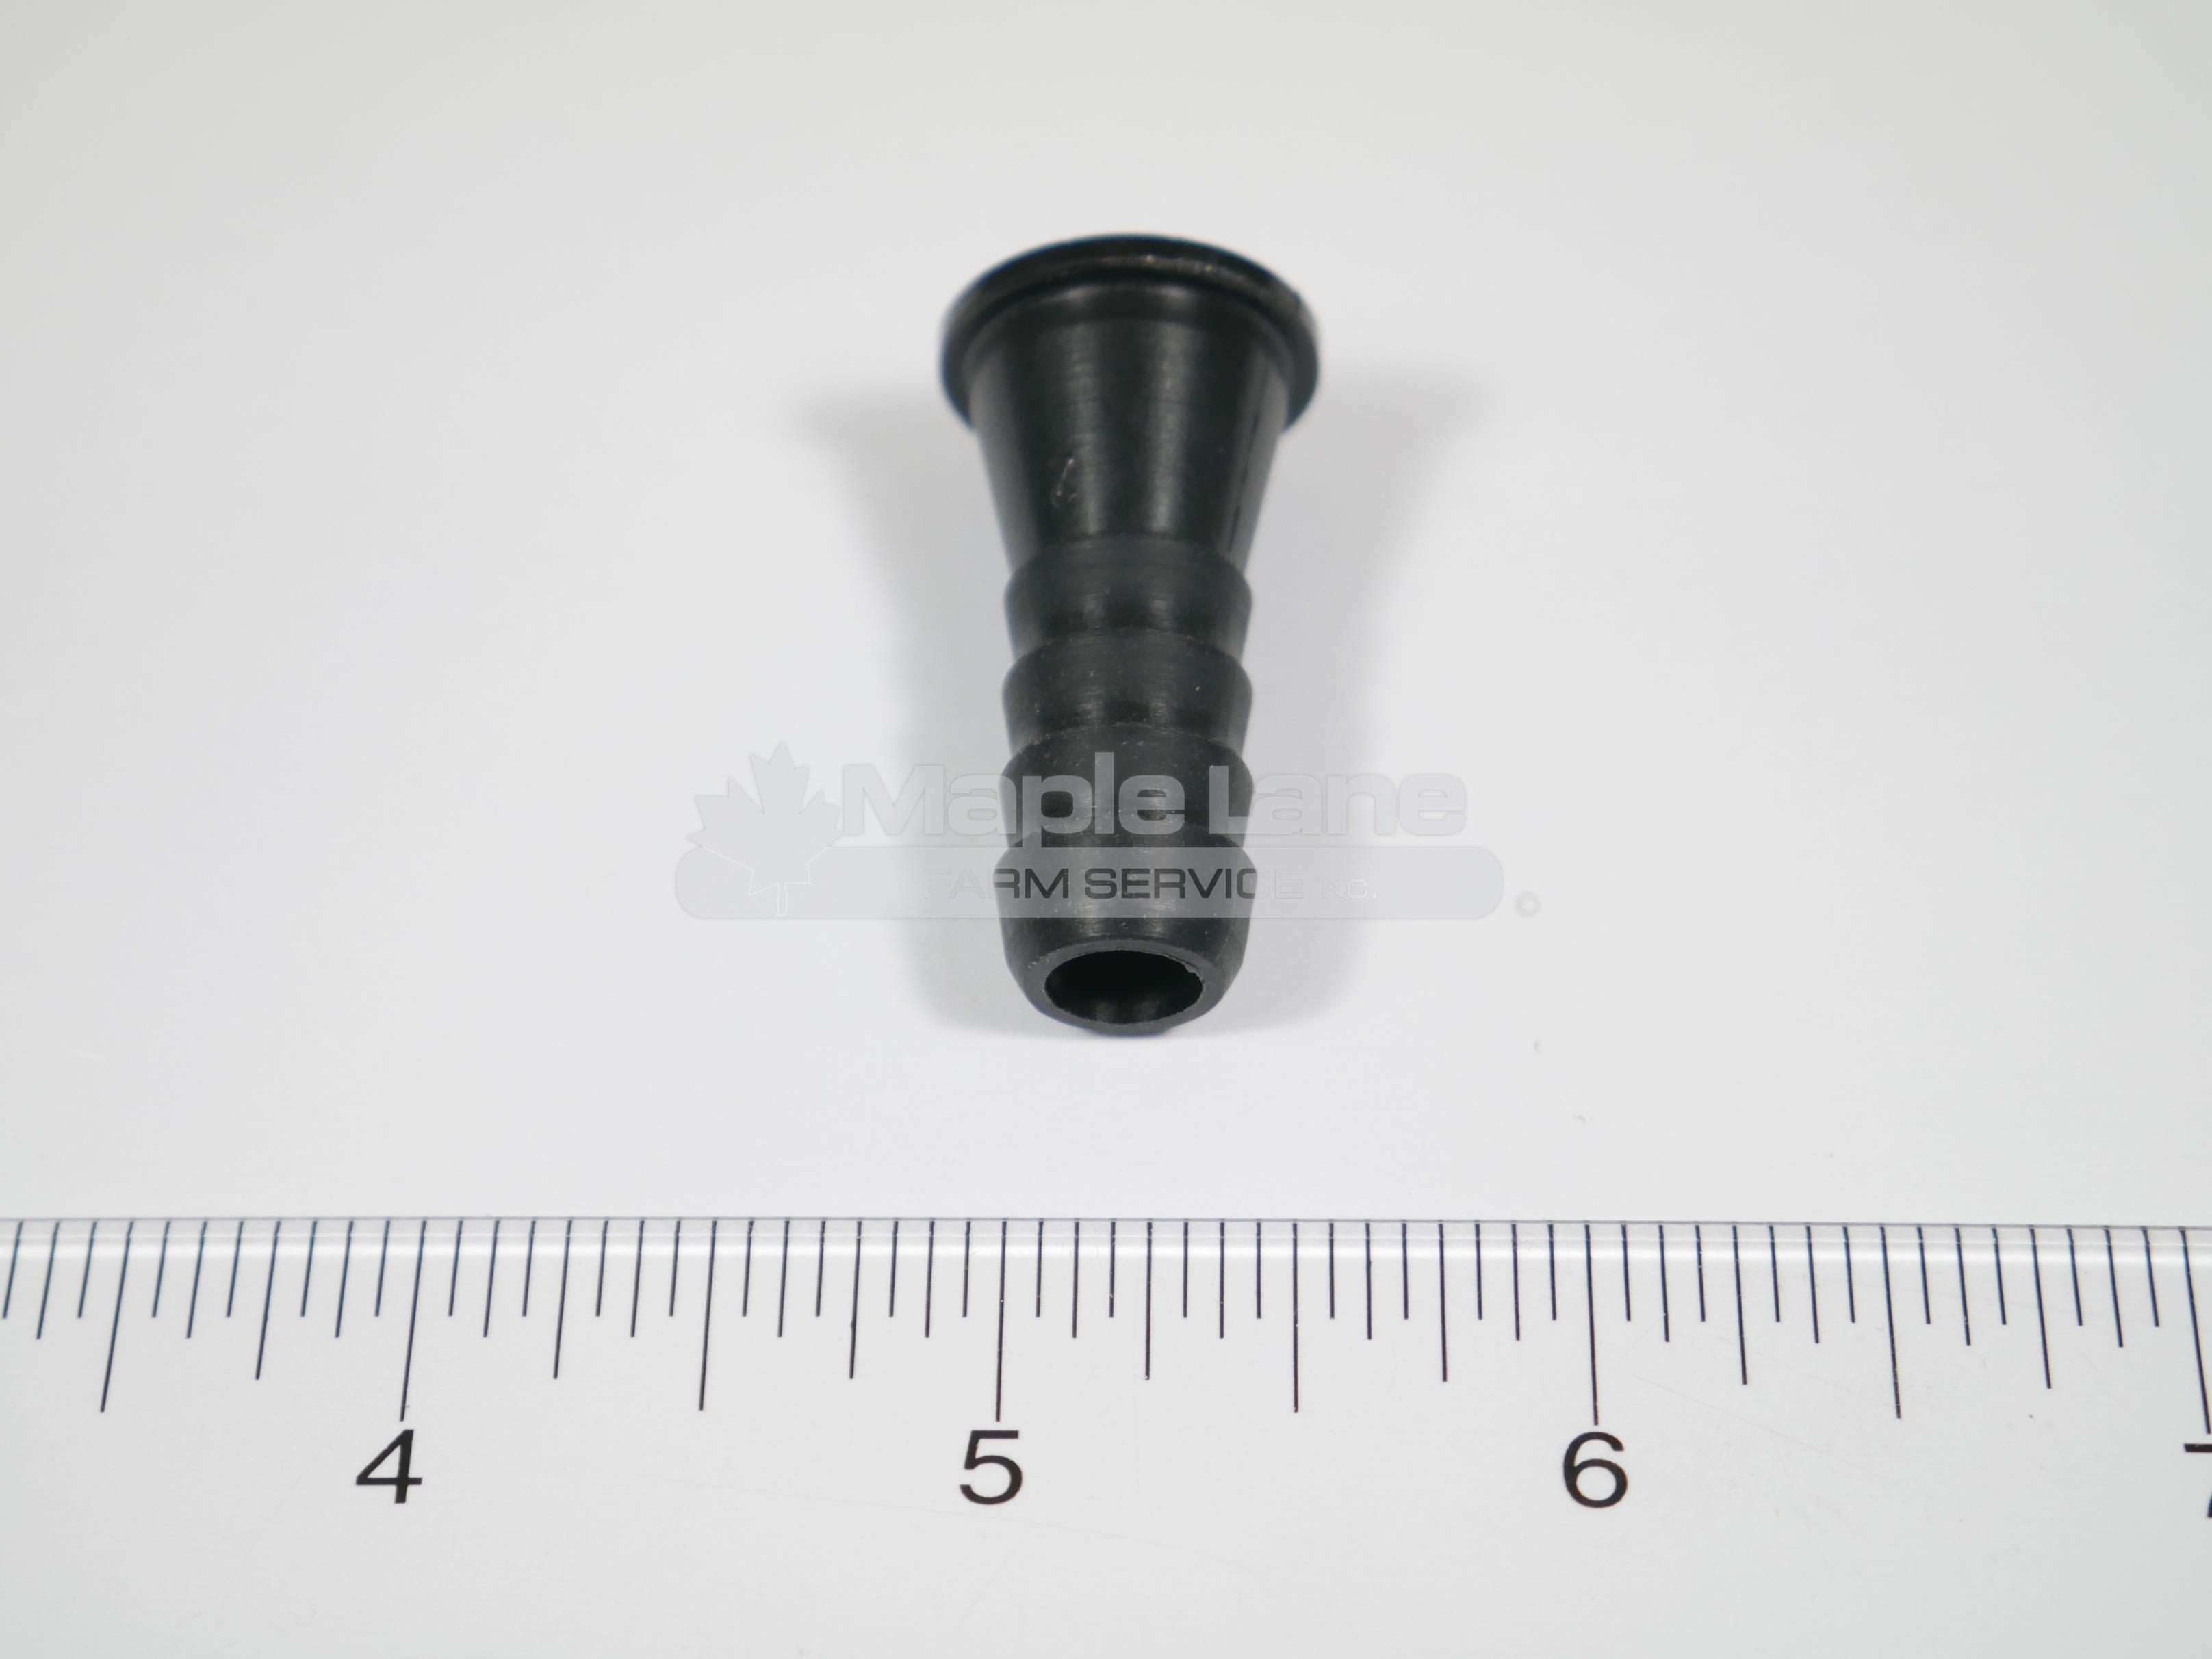 330676 Fitting 3/8" HB for 1/2" Nut